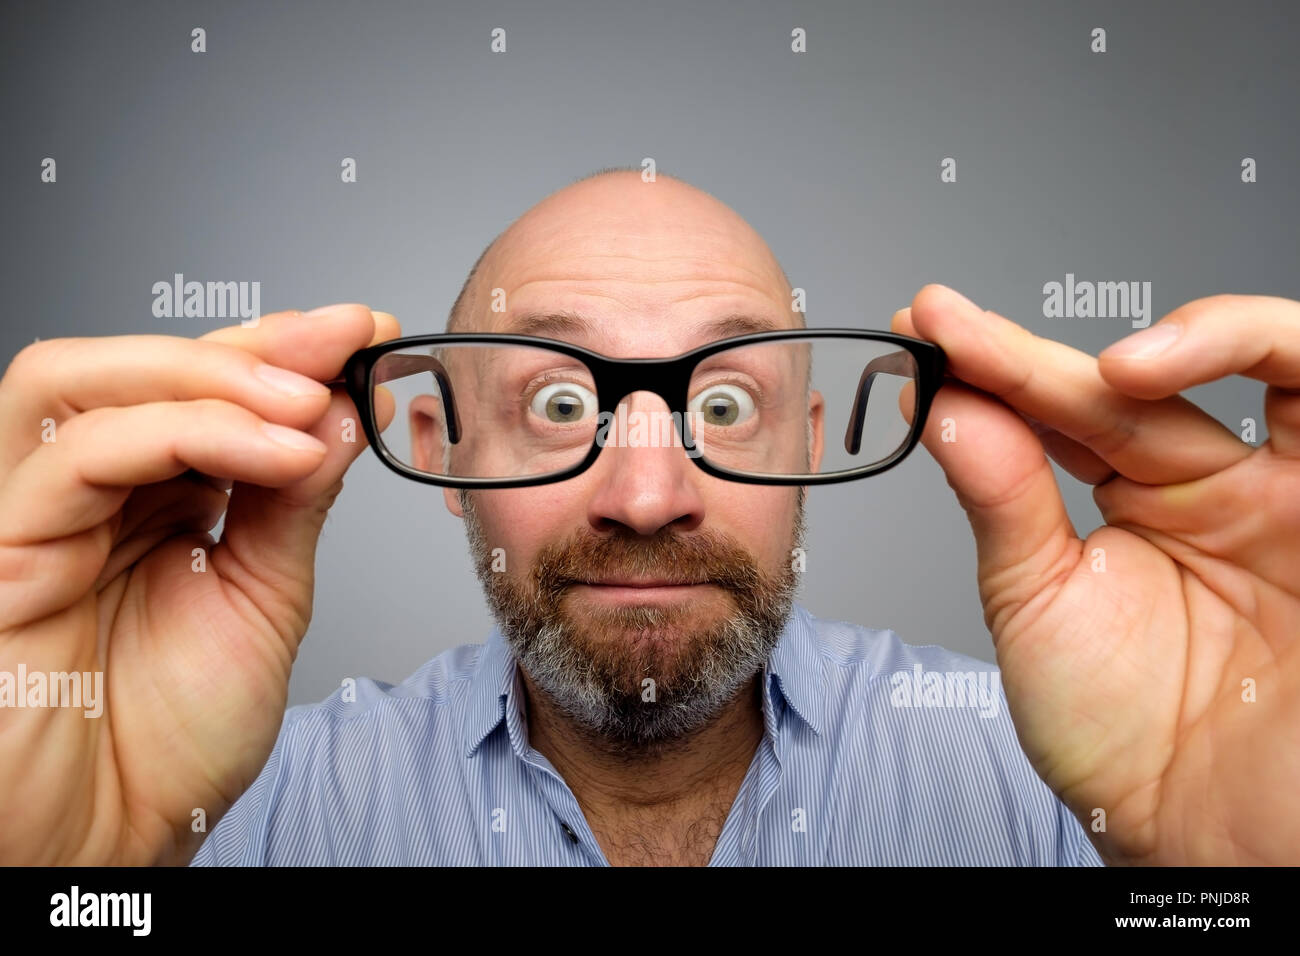 Funny european man looking through glasses. Have problems with eyesight. His eyes are looking very small Stock Photo